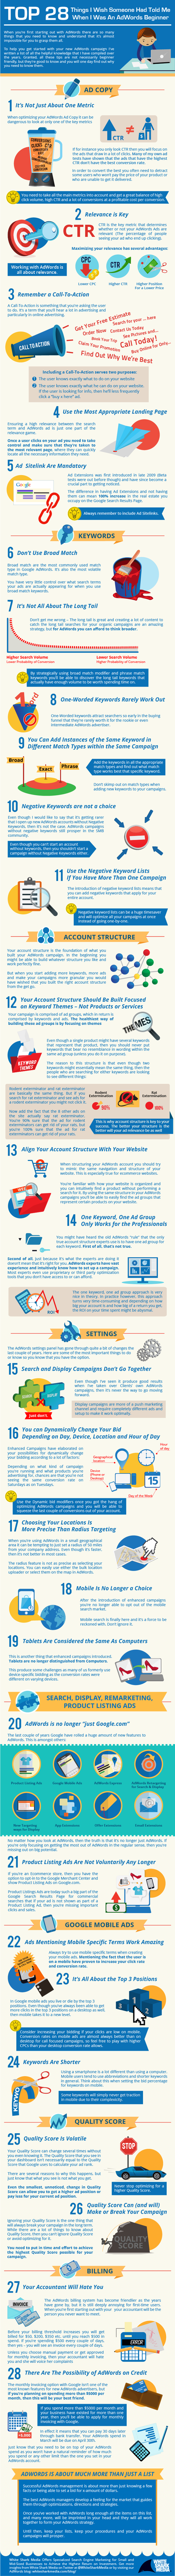 Top-28-Things-I-wish-someone-had-told-me-when-I-was-an-AdWords-beginner-Infographic-White-Shark-Media